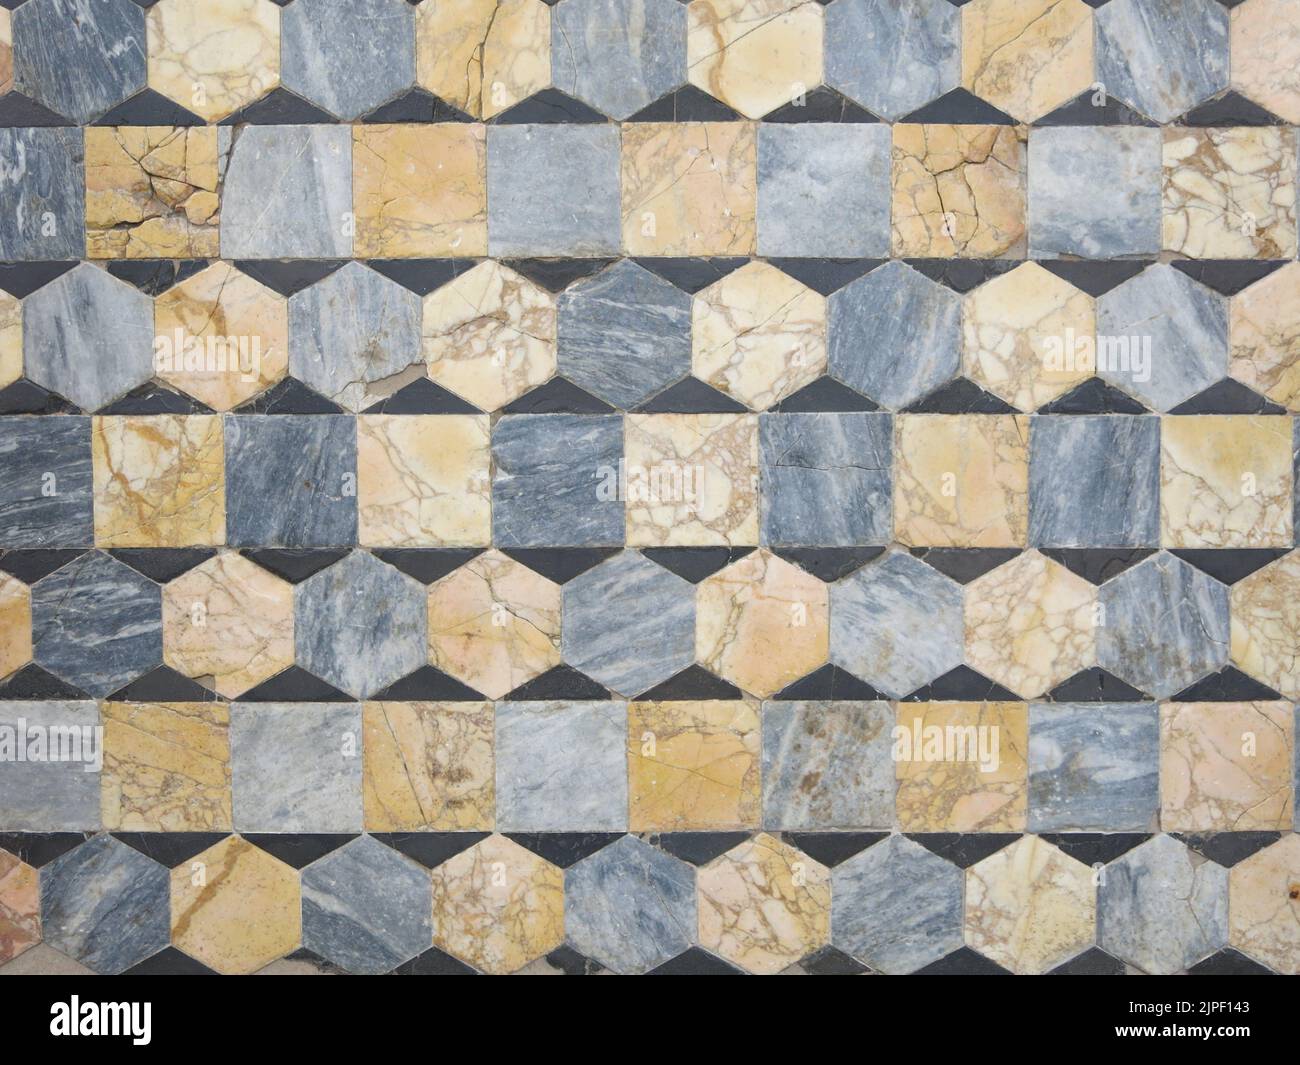 Opus Sectile: 2nd century Roman pavement in marble & schist with a pattern of alternate lines of squares & hexagons; Museum of Art & History, Orange. Stock Photo